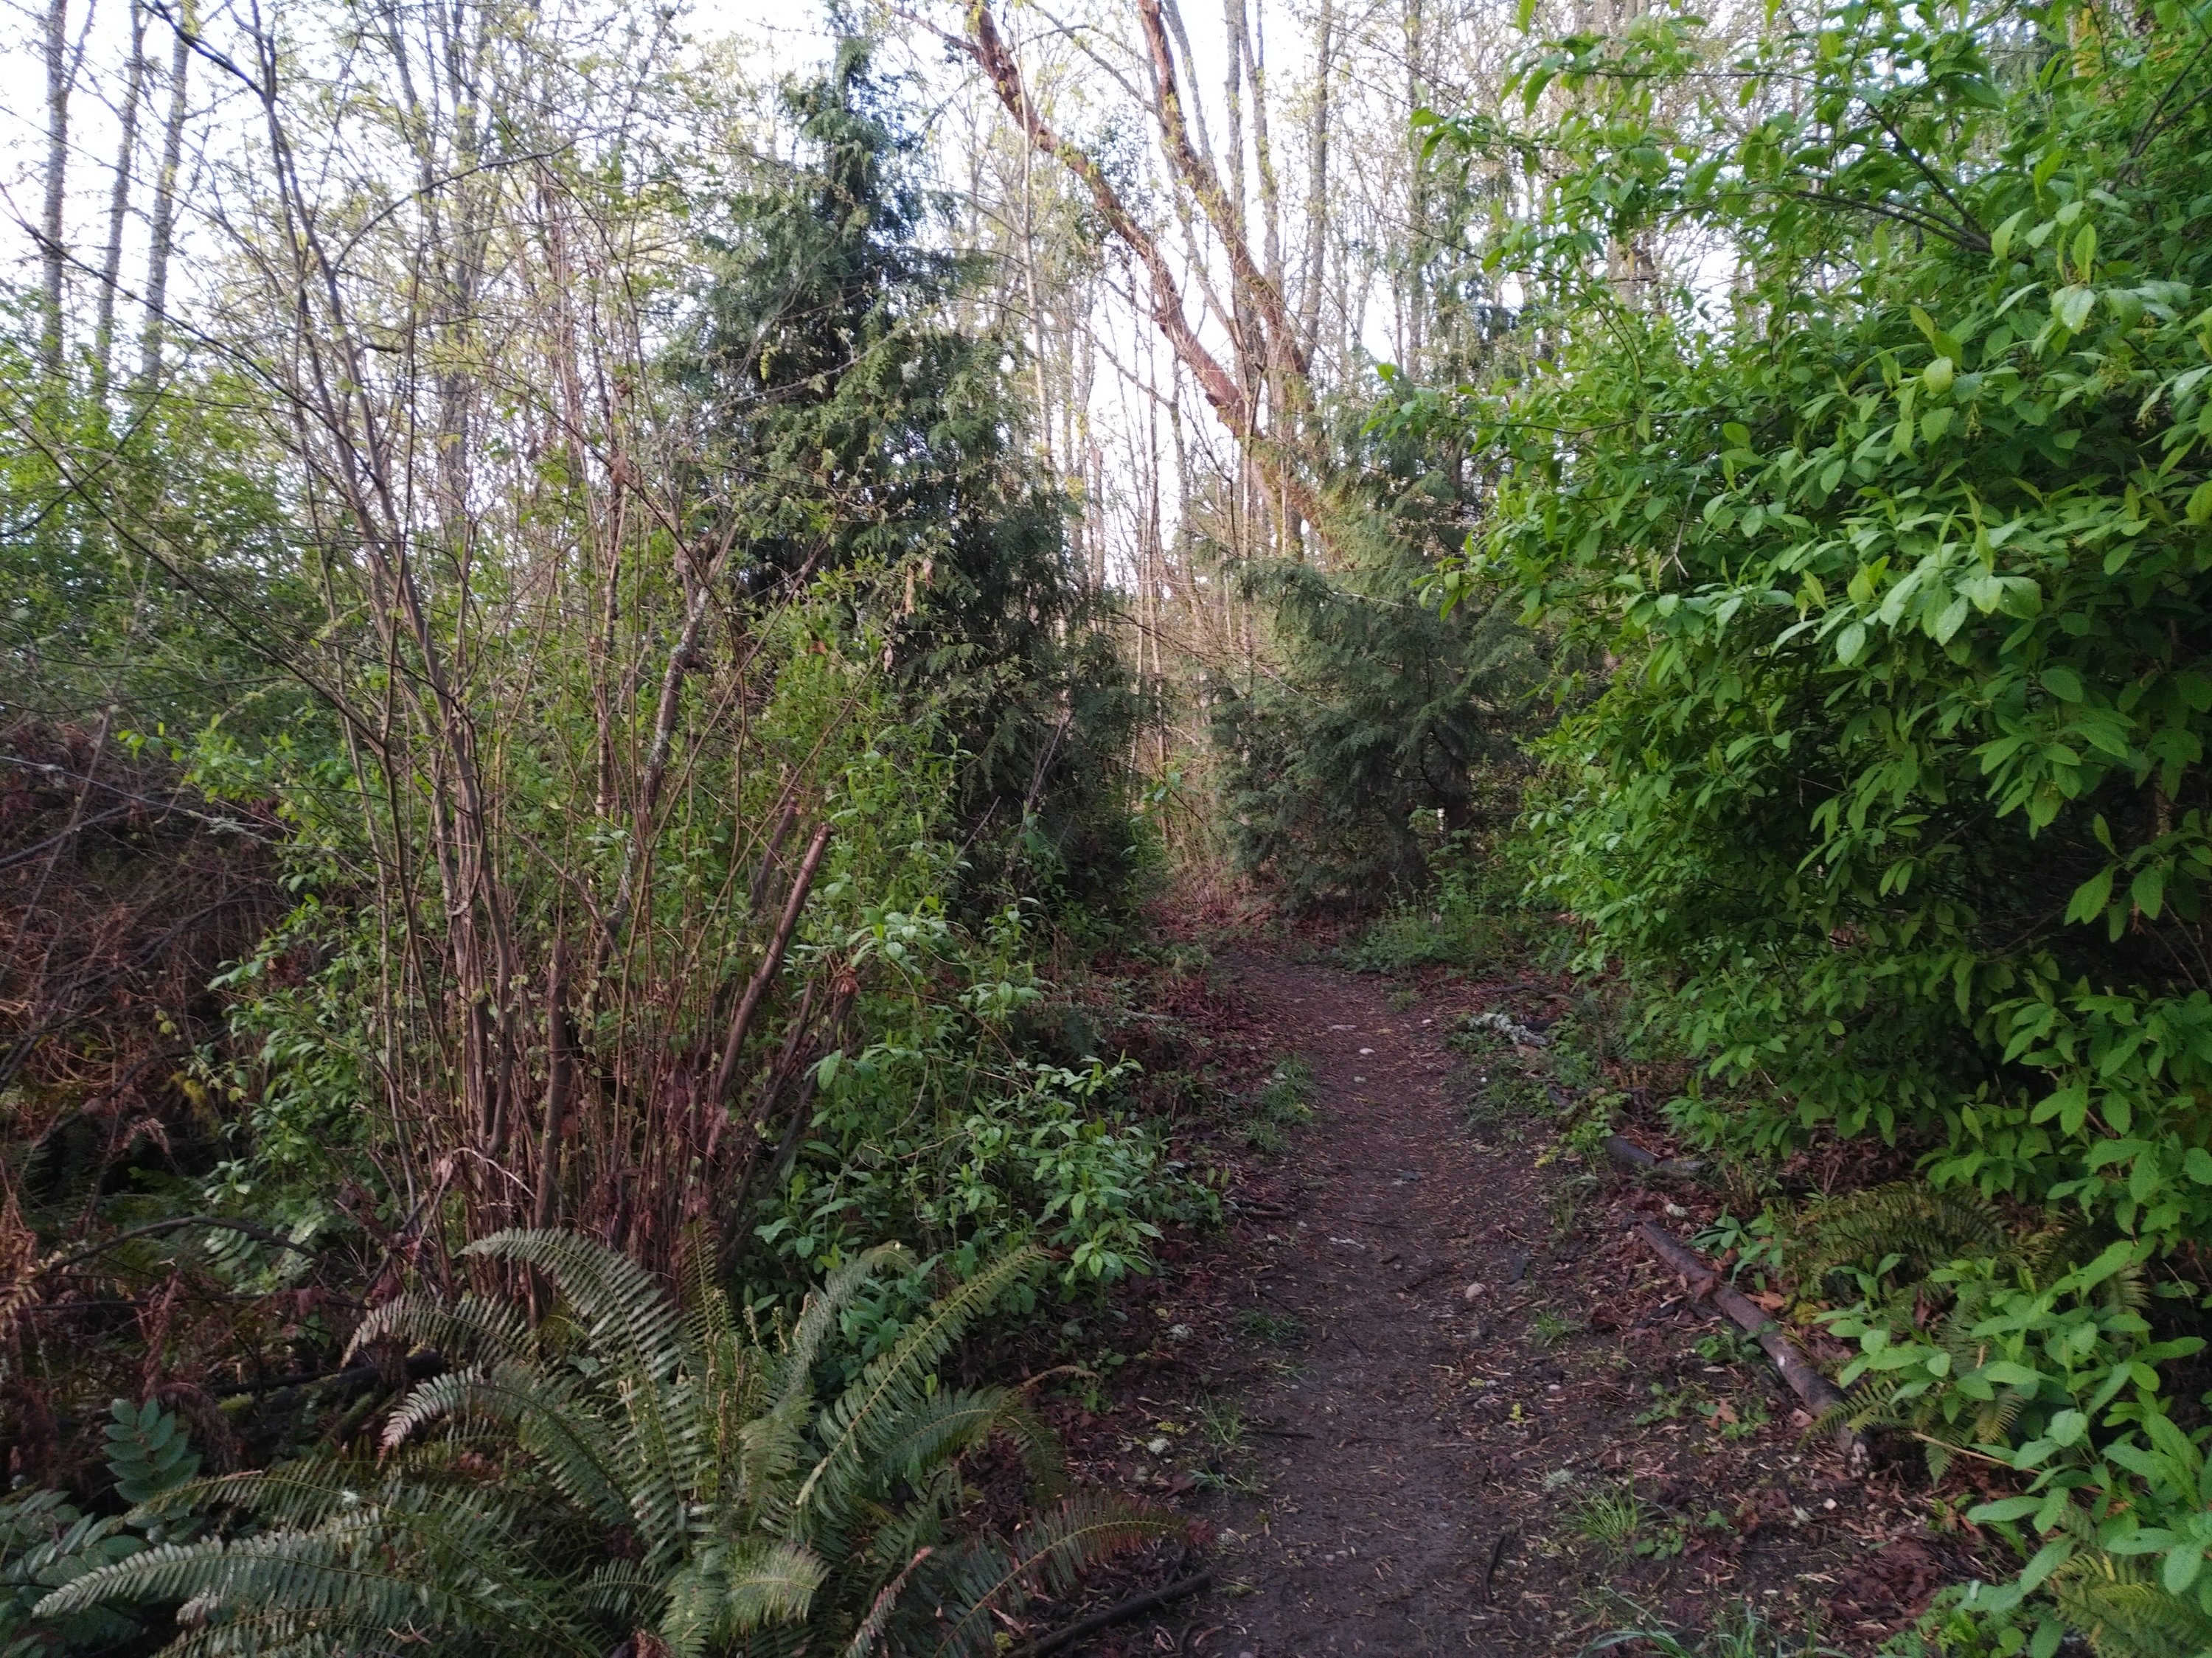 A picture of a dirt path going away from the viewer through a forest. Ferns and shrubs line the path.